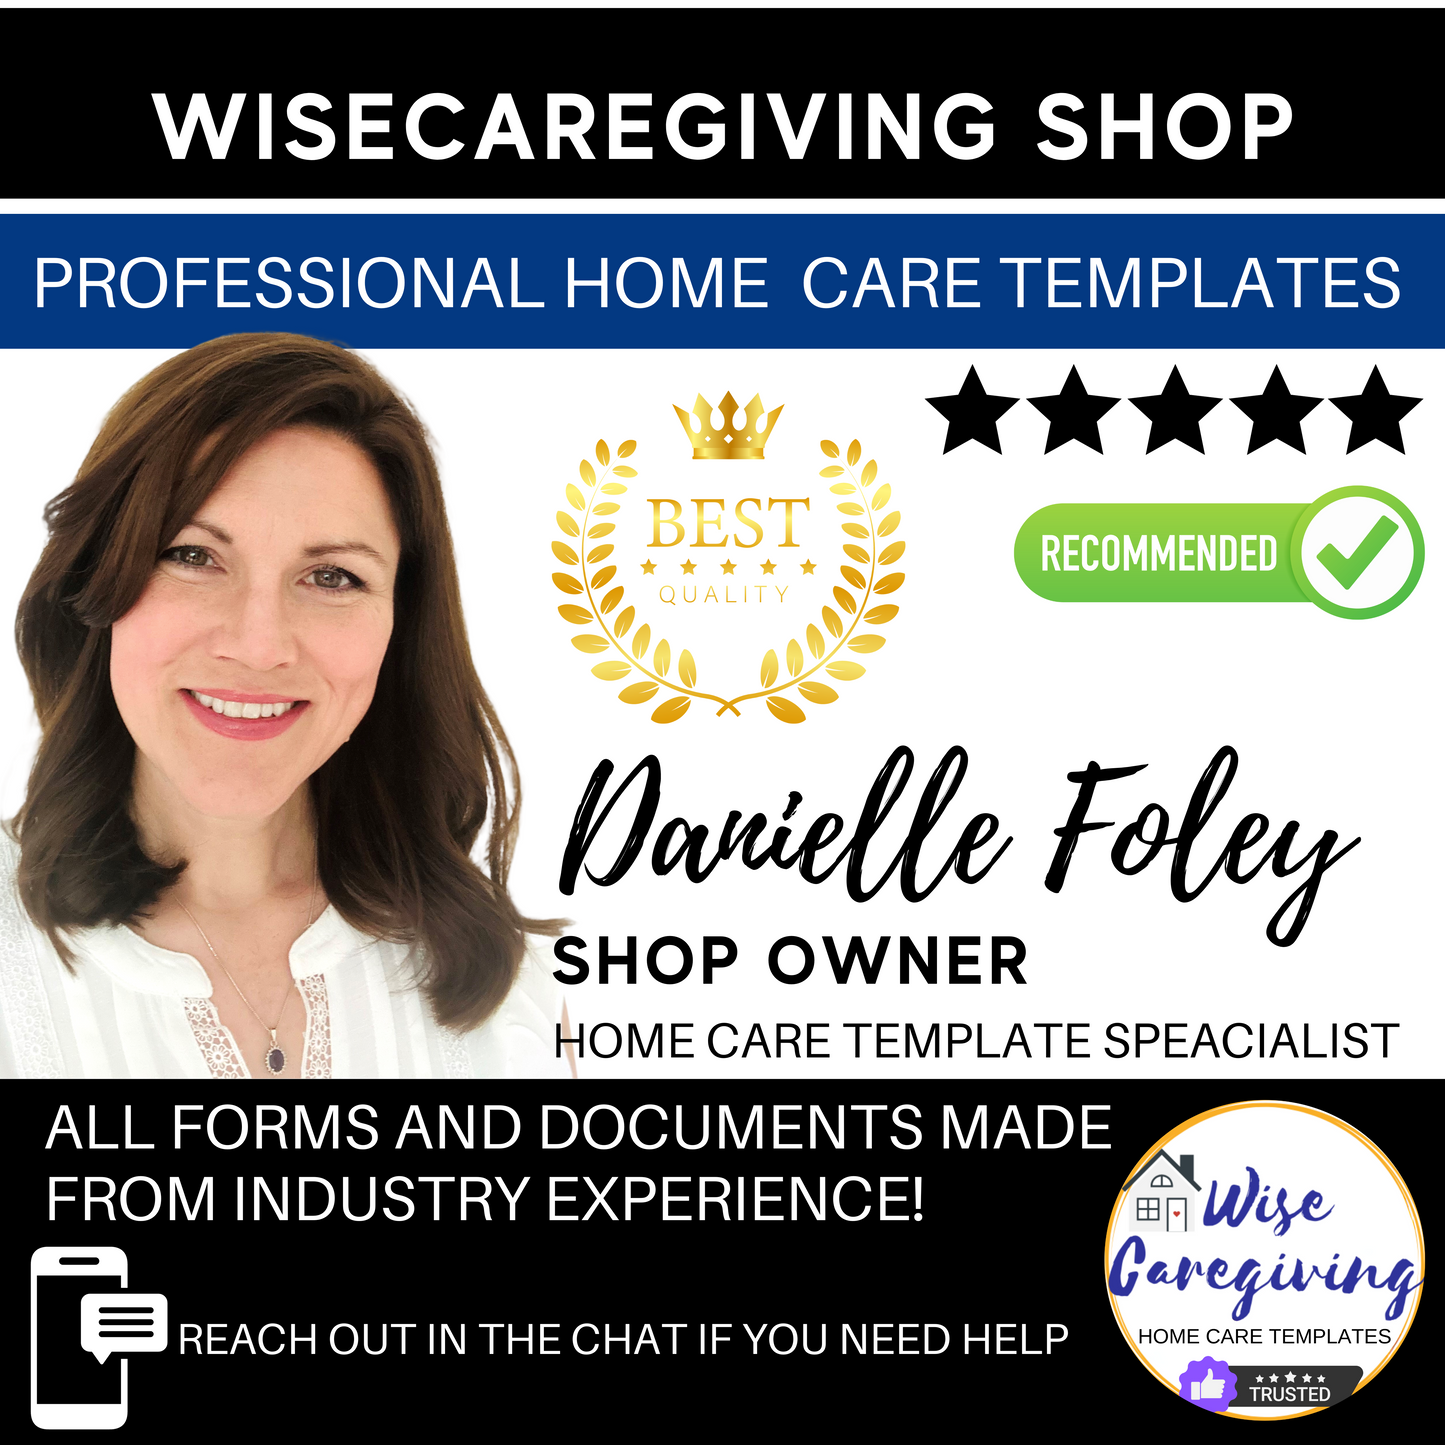 Non-Compete Agreement Template for Home Care Employees